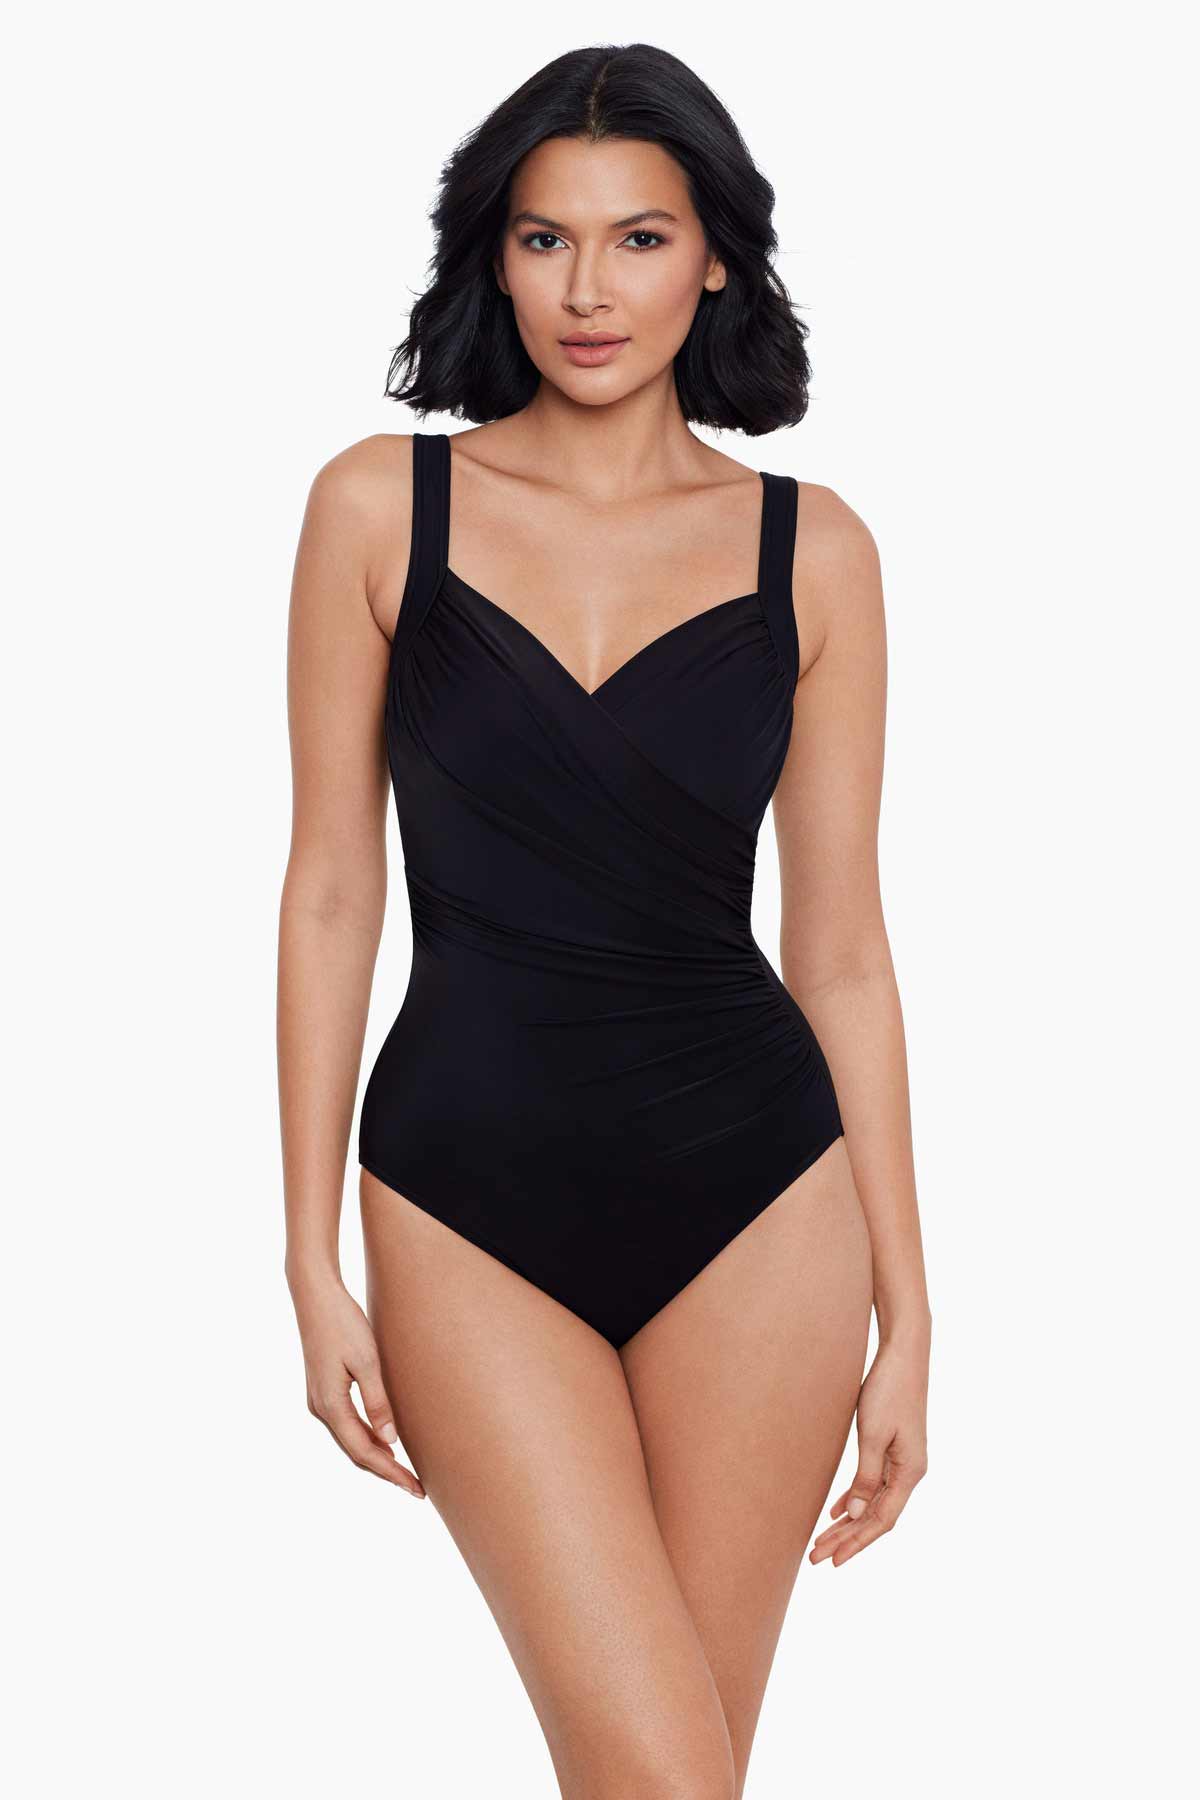 Sculpting swimsuit! Linked 👇 #sculptme #shapewear #shapingswimsuit #